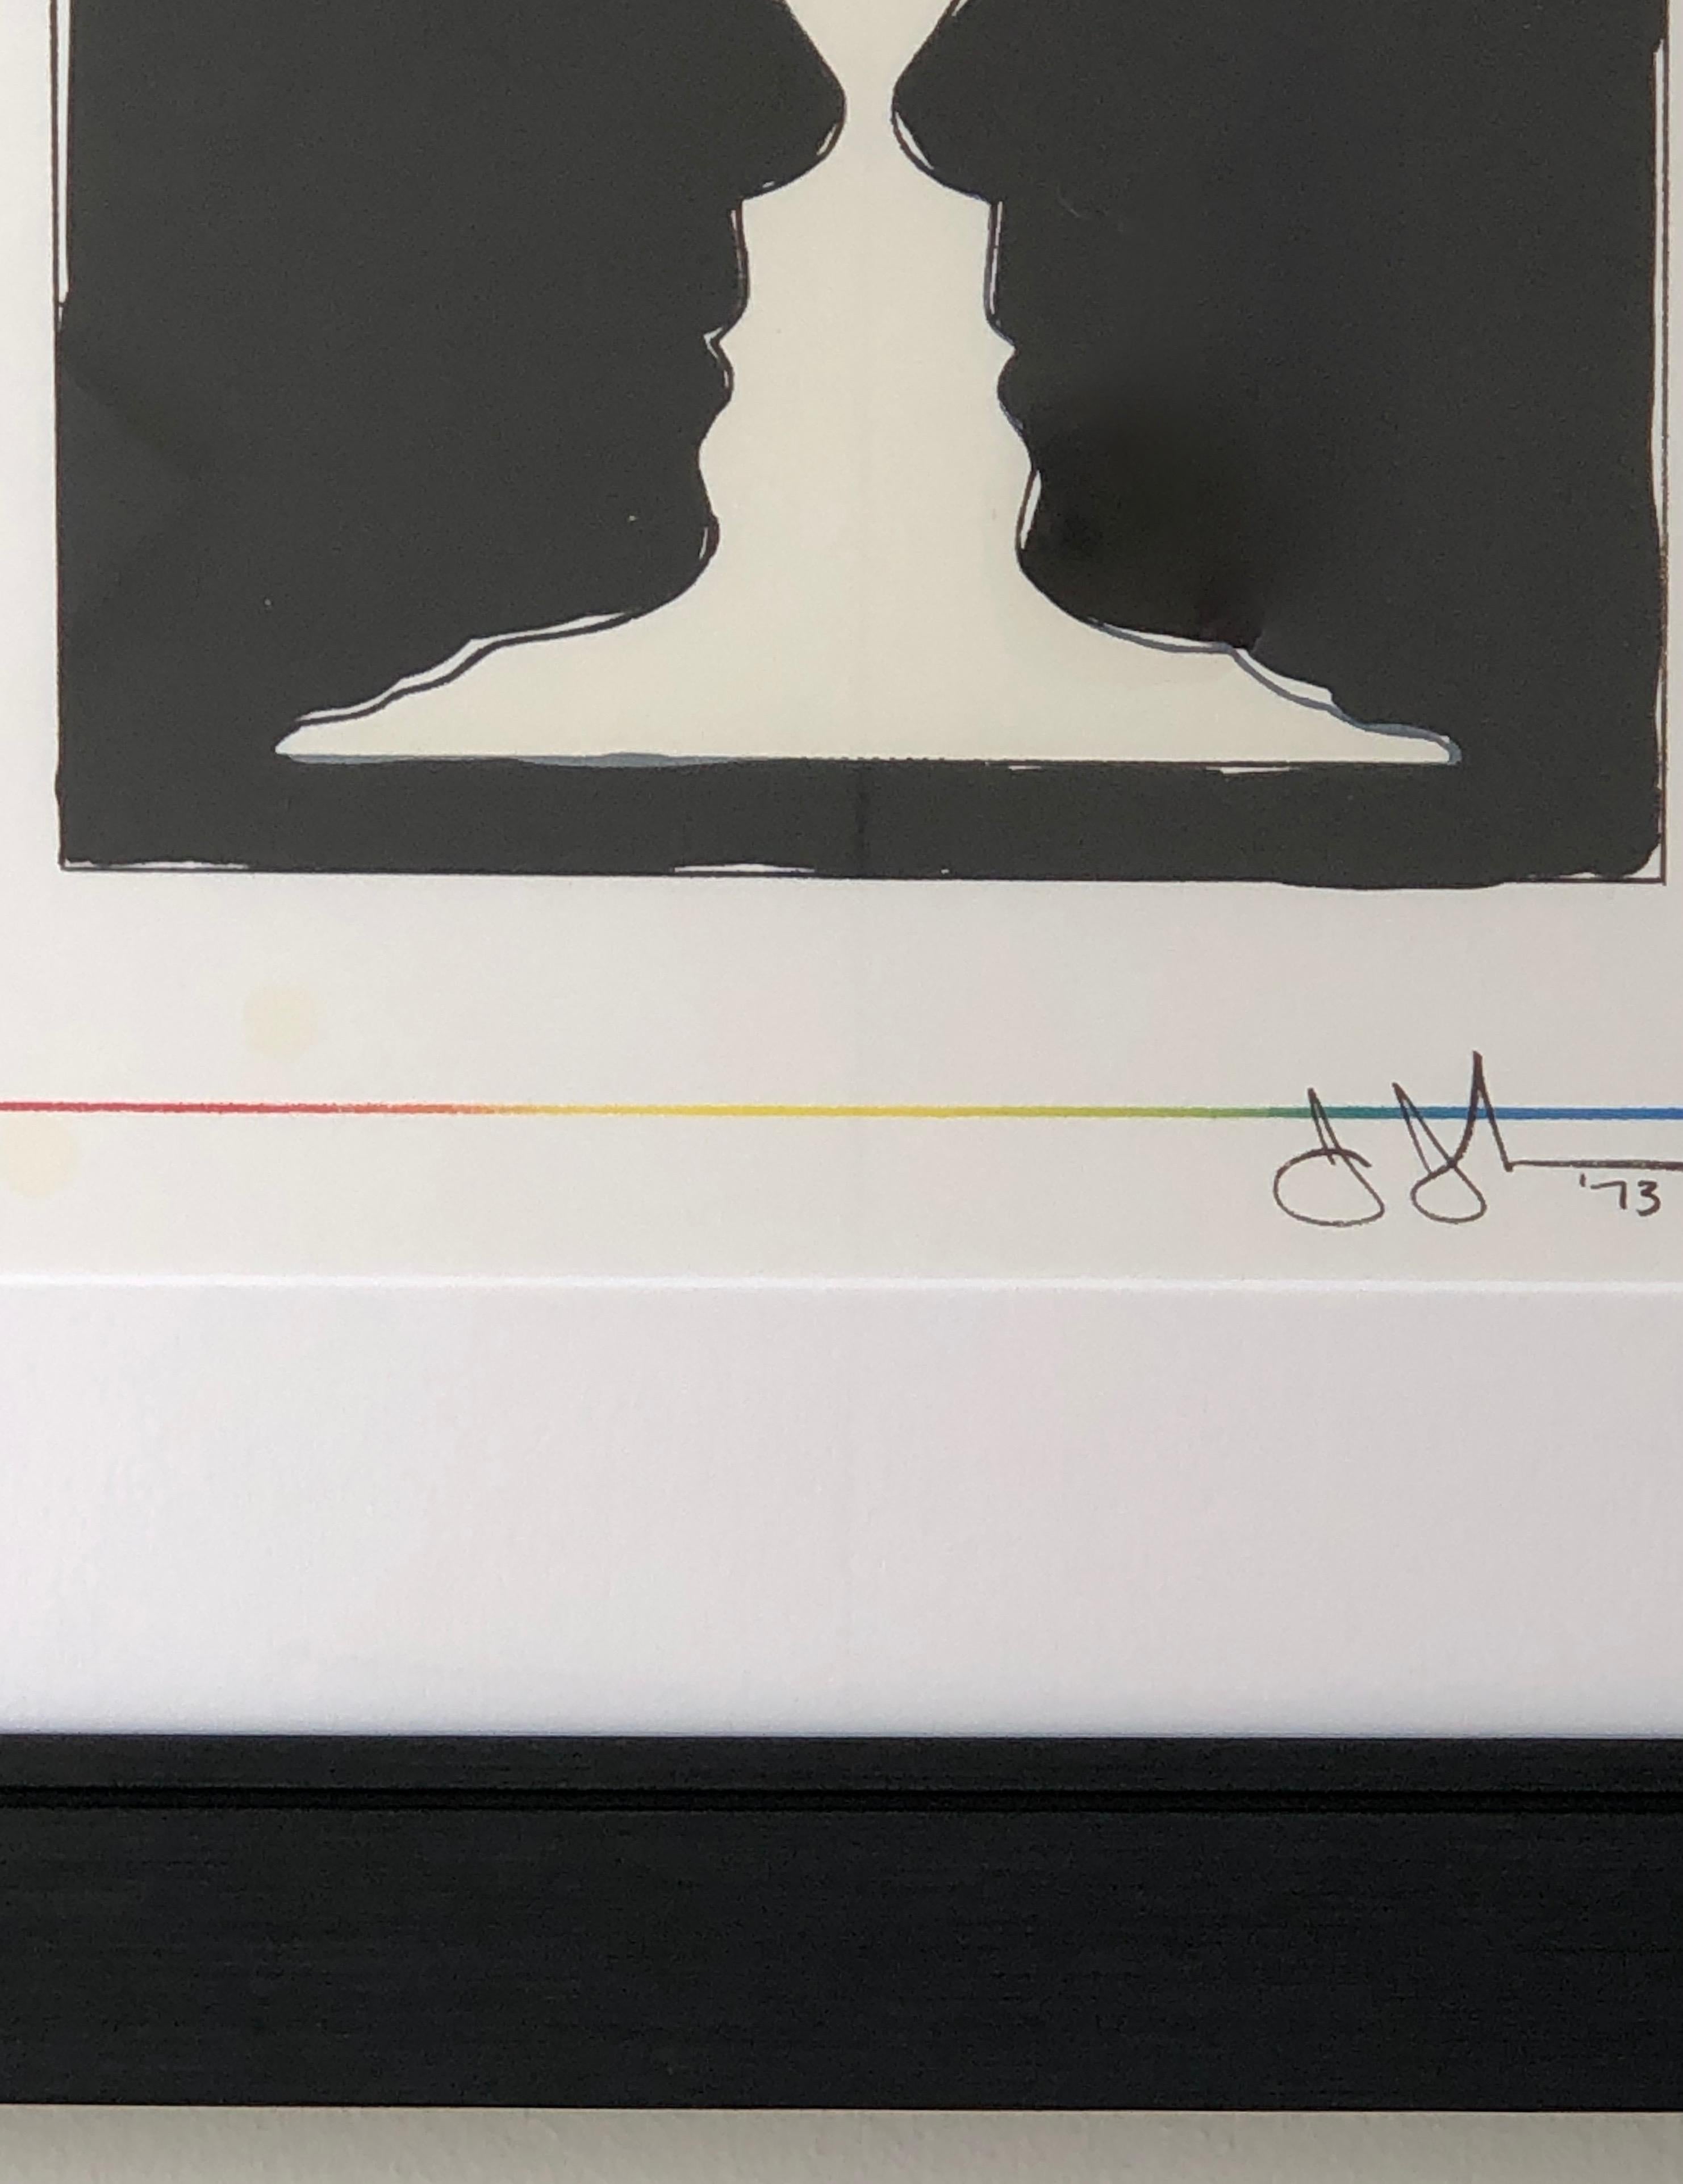 Mid-Century Modern Century Black and White Jasper Johns Lithograph, Cup Two Picasso, 1973